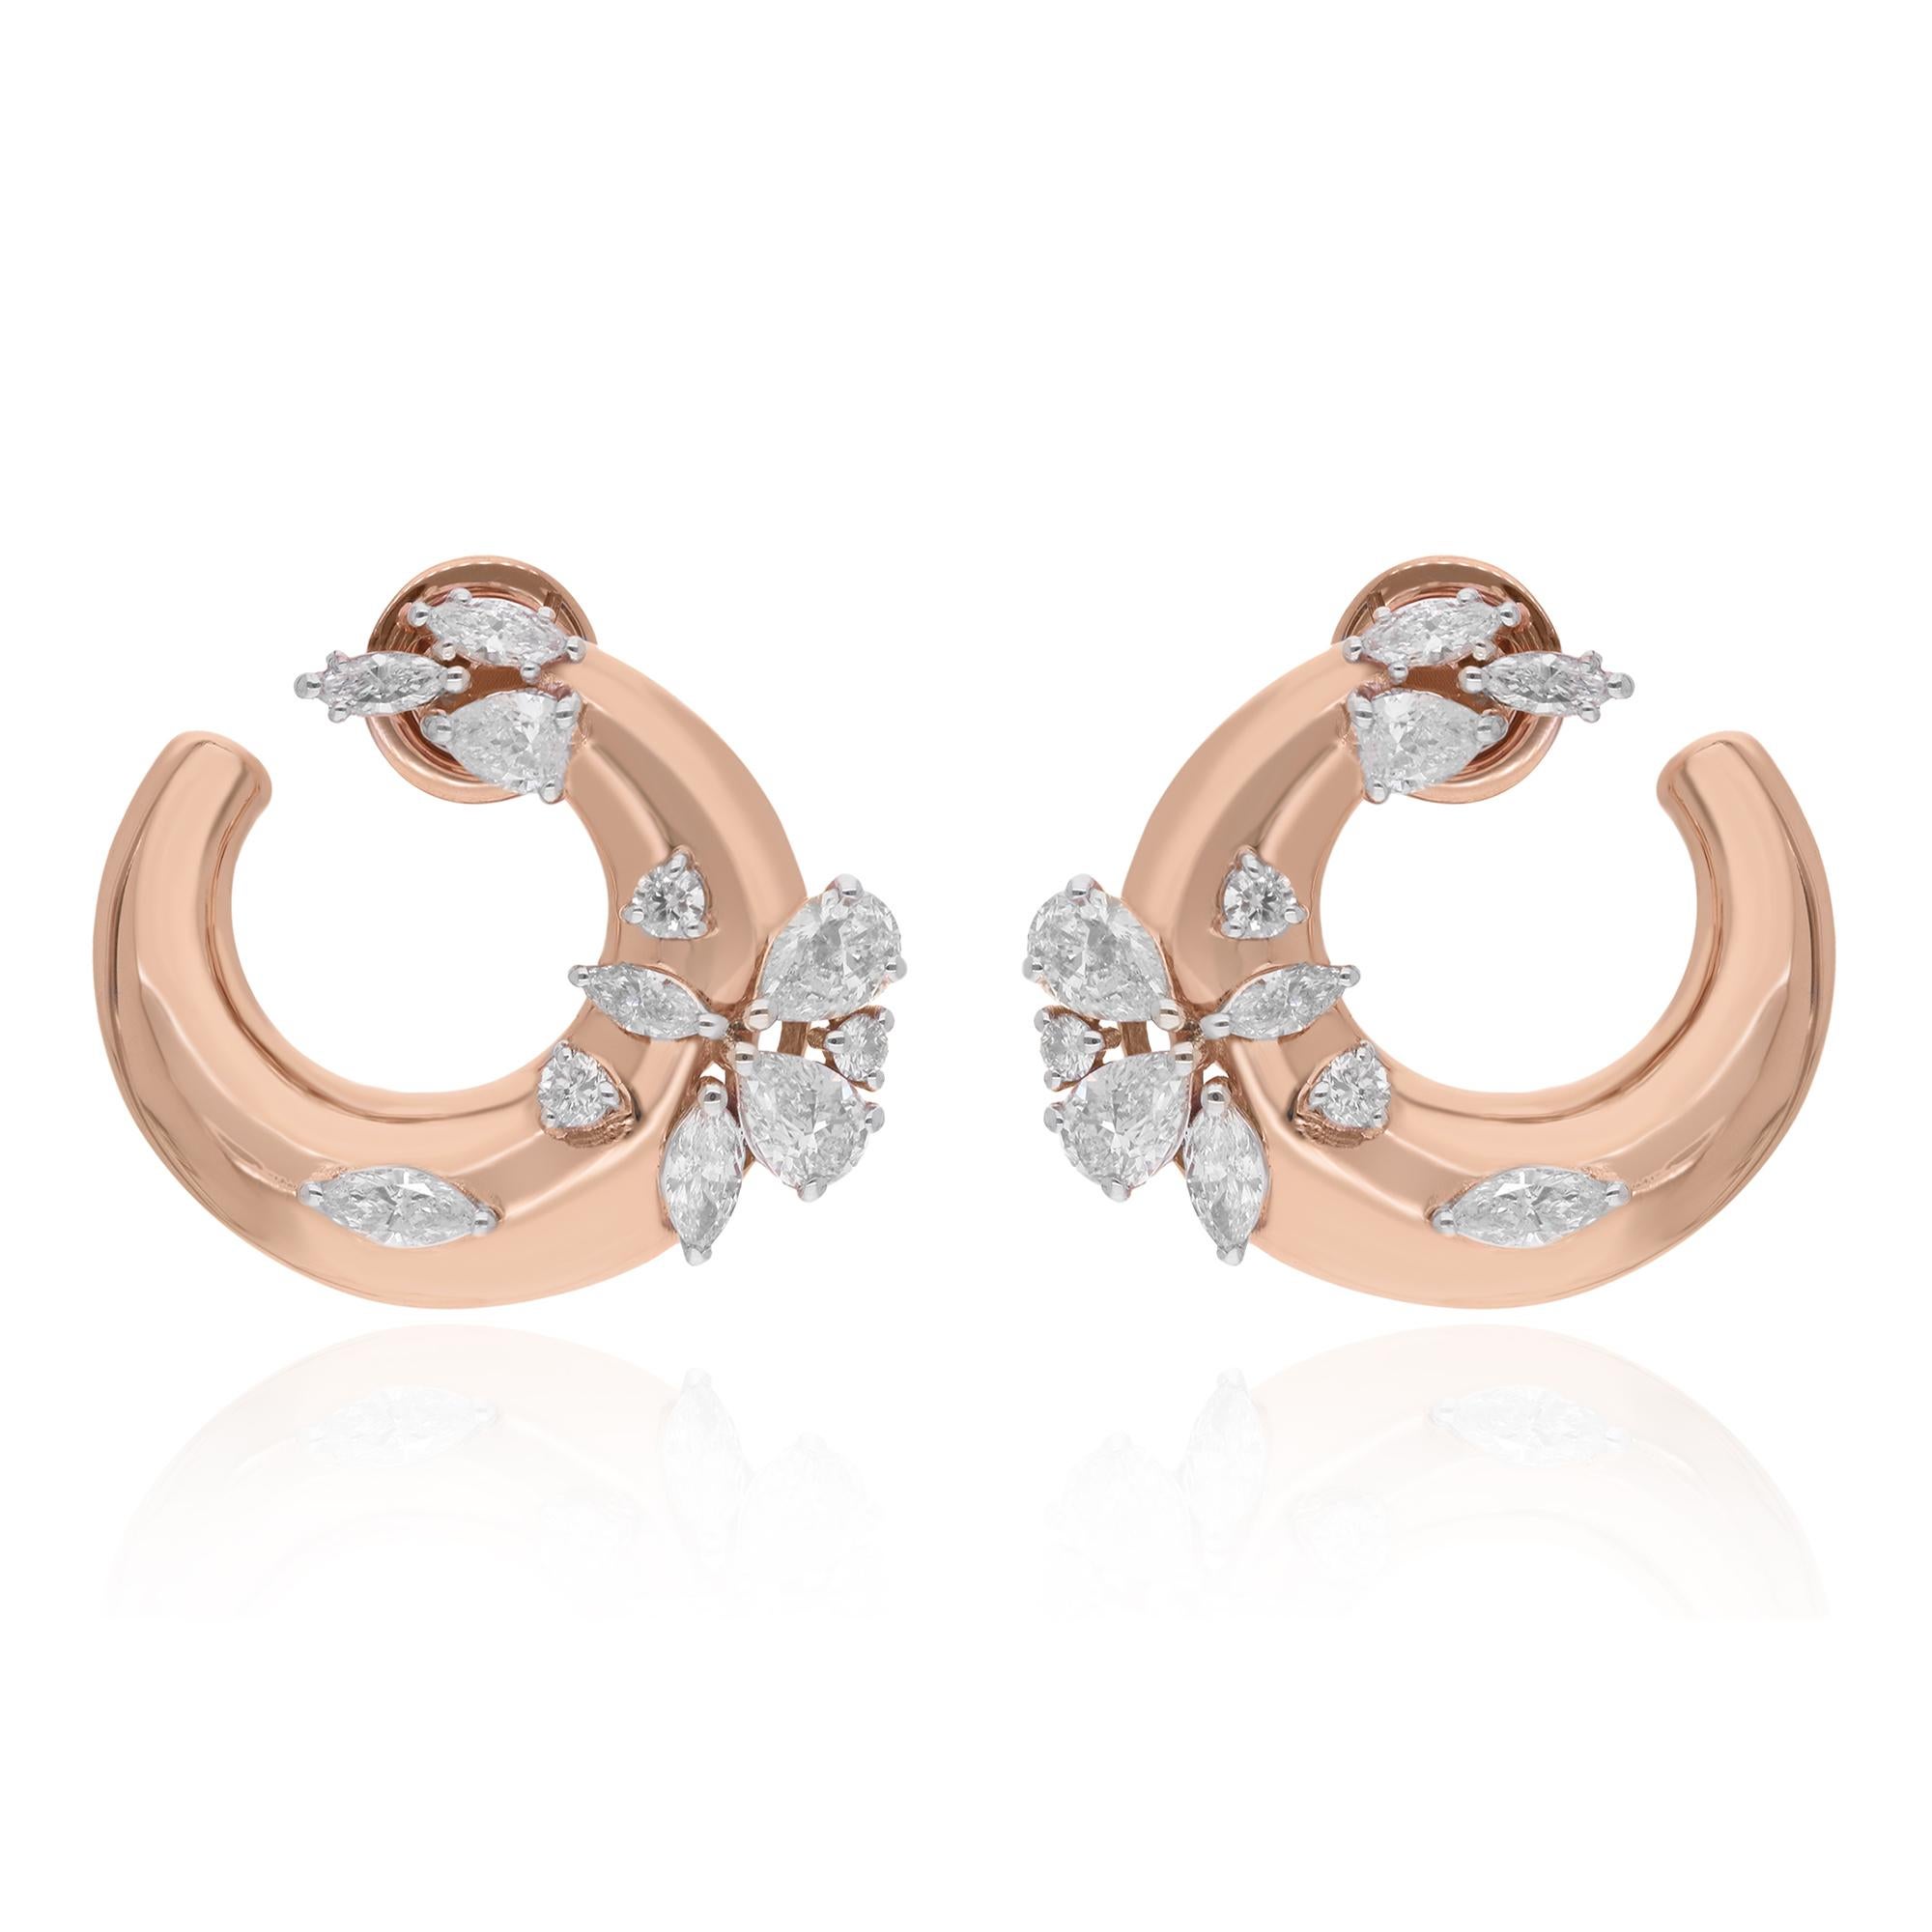 Elevate your style with these mesmerizing hoop earrings, showcasing a total of 2.11 carats of pear and marquise-cut diamonds delicately set in luxurious 14 karat rose gold. Designed to exude timeless elegance and sophistication, these fine jewelry